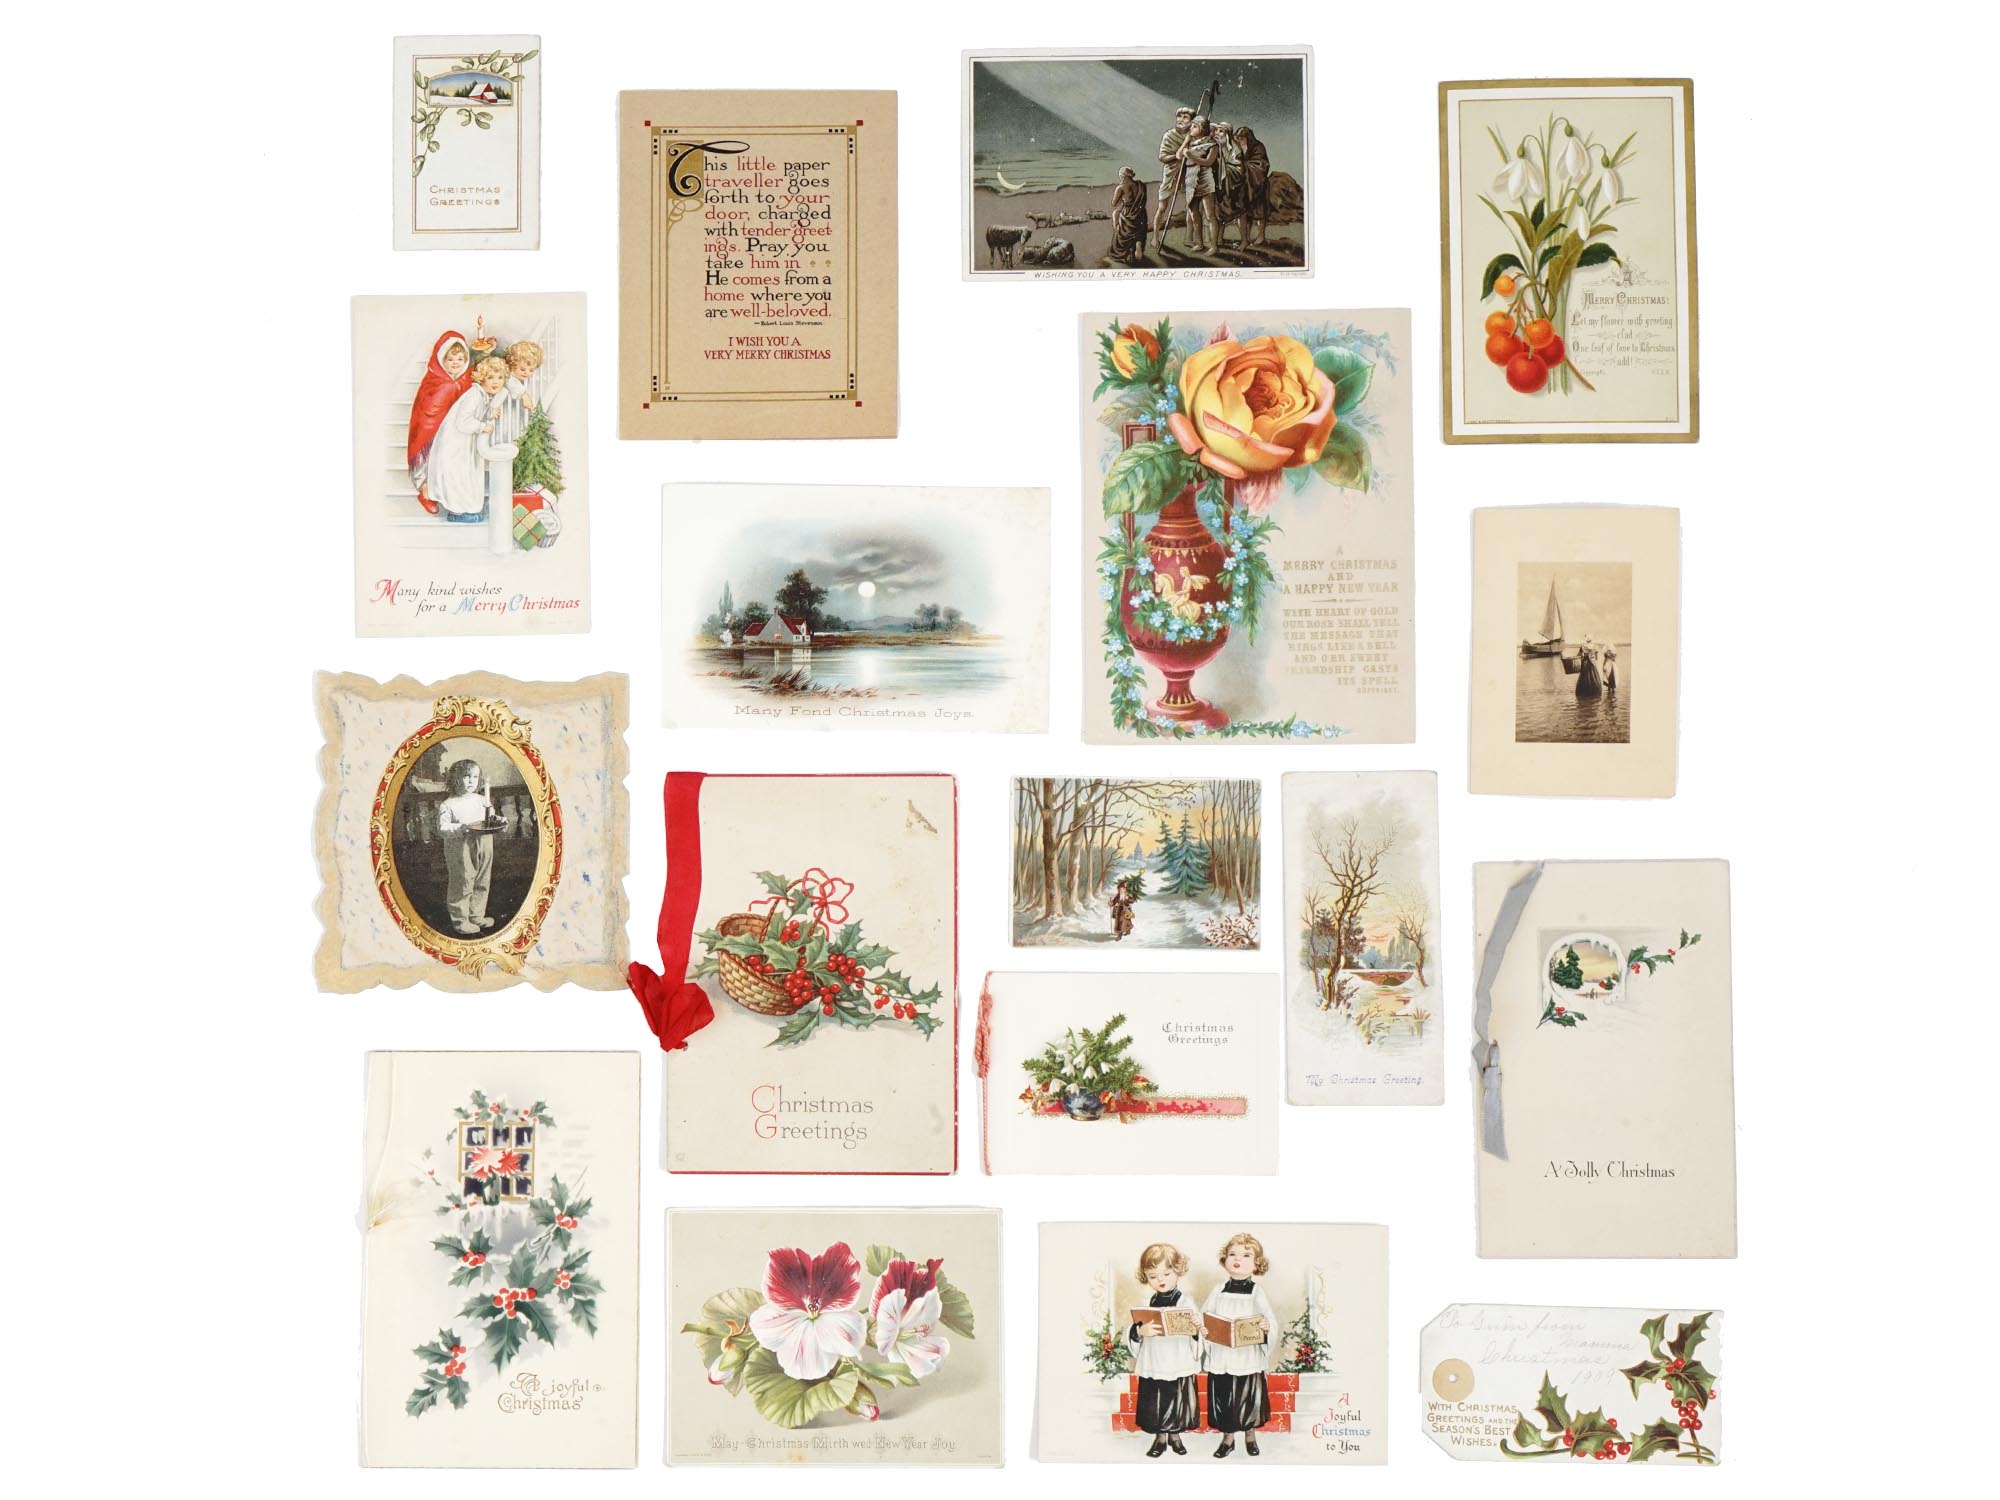 RARE ANTIQUE CHRISTMAS CARDS COLLECTION IN ALBUM PIC-5